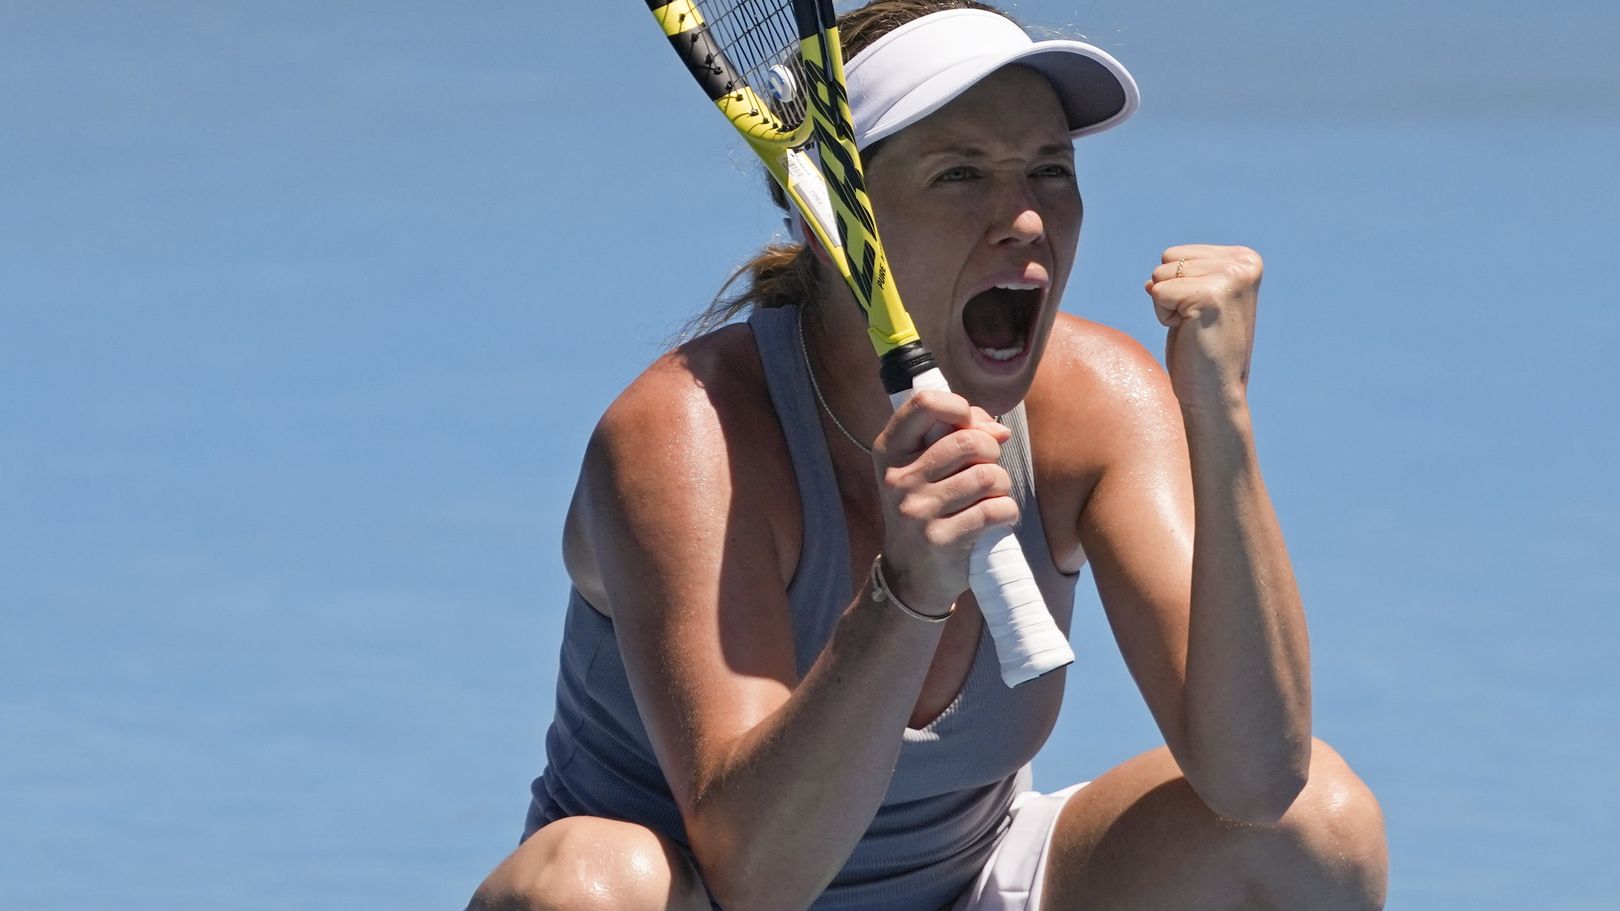 Danielle Collins of the U.S. reacts after defeating Alize Cornet of France in their quarterfinal match at the Australian Open.